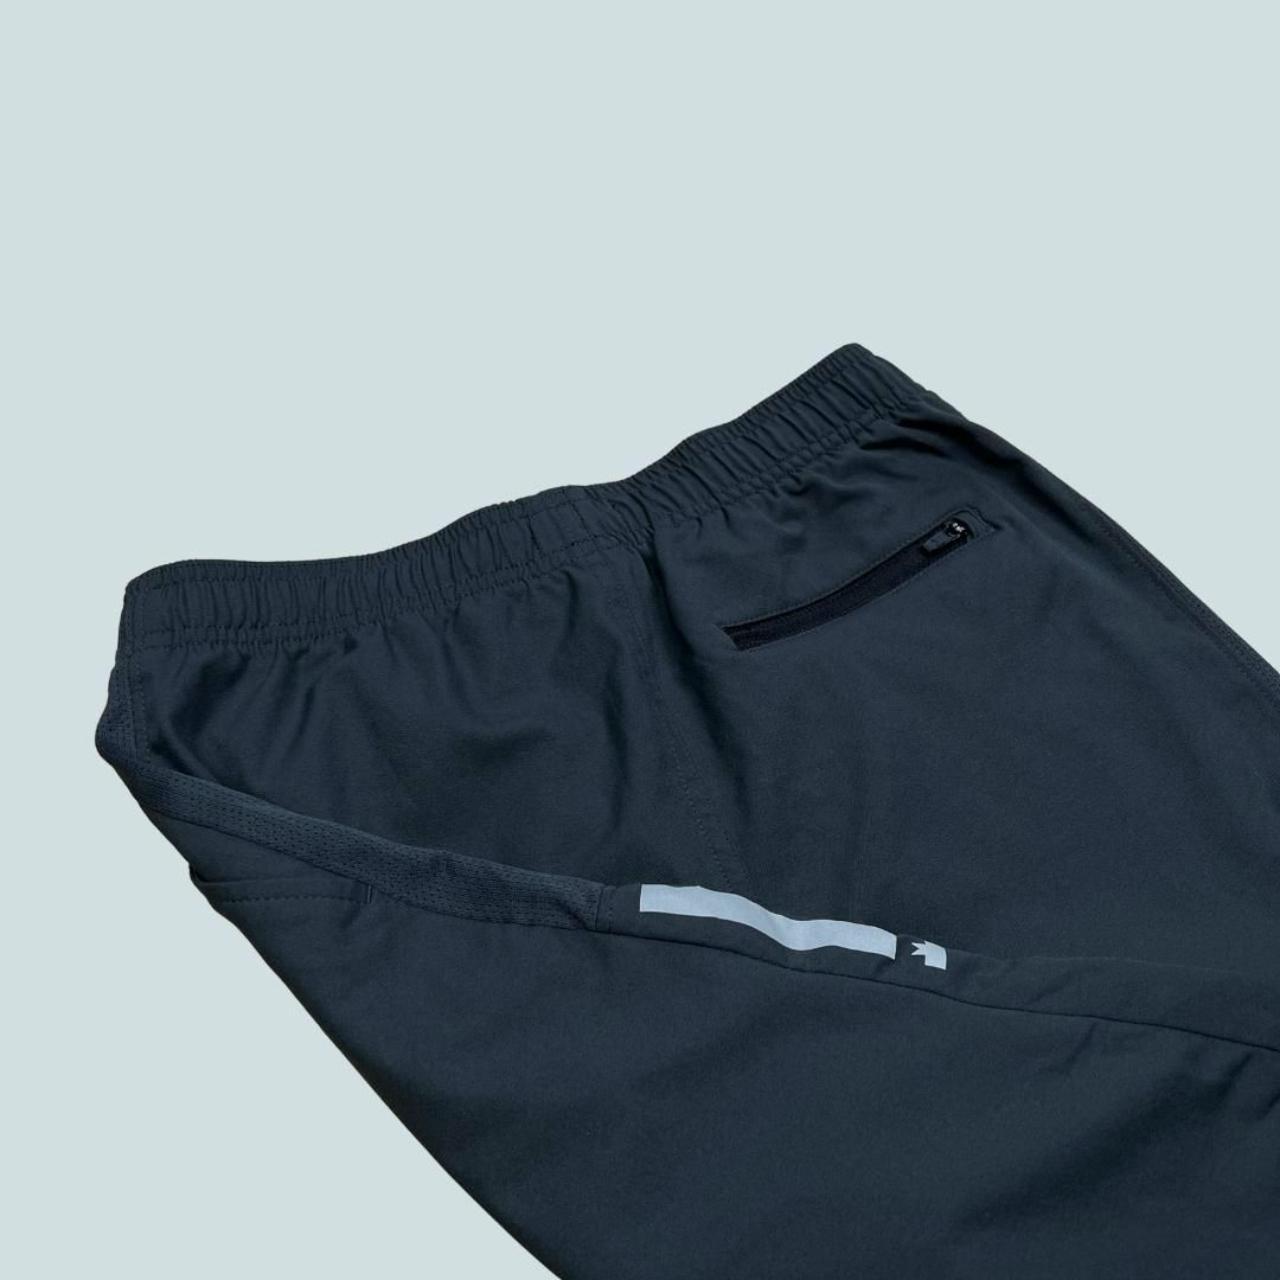 Product Image 2 - MSX BY MICHAEL STRAHAN SHORTS

Please